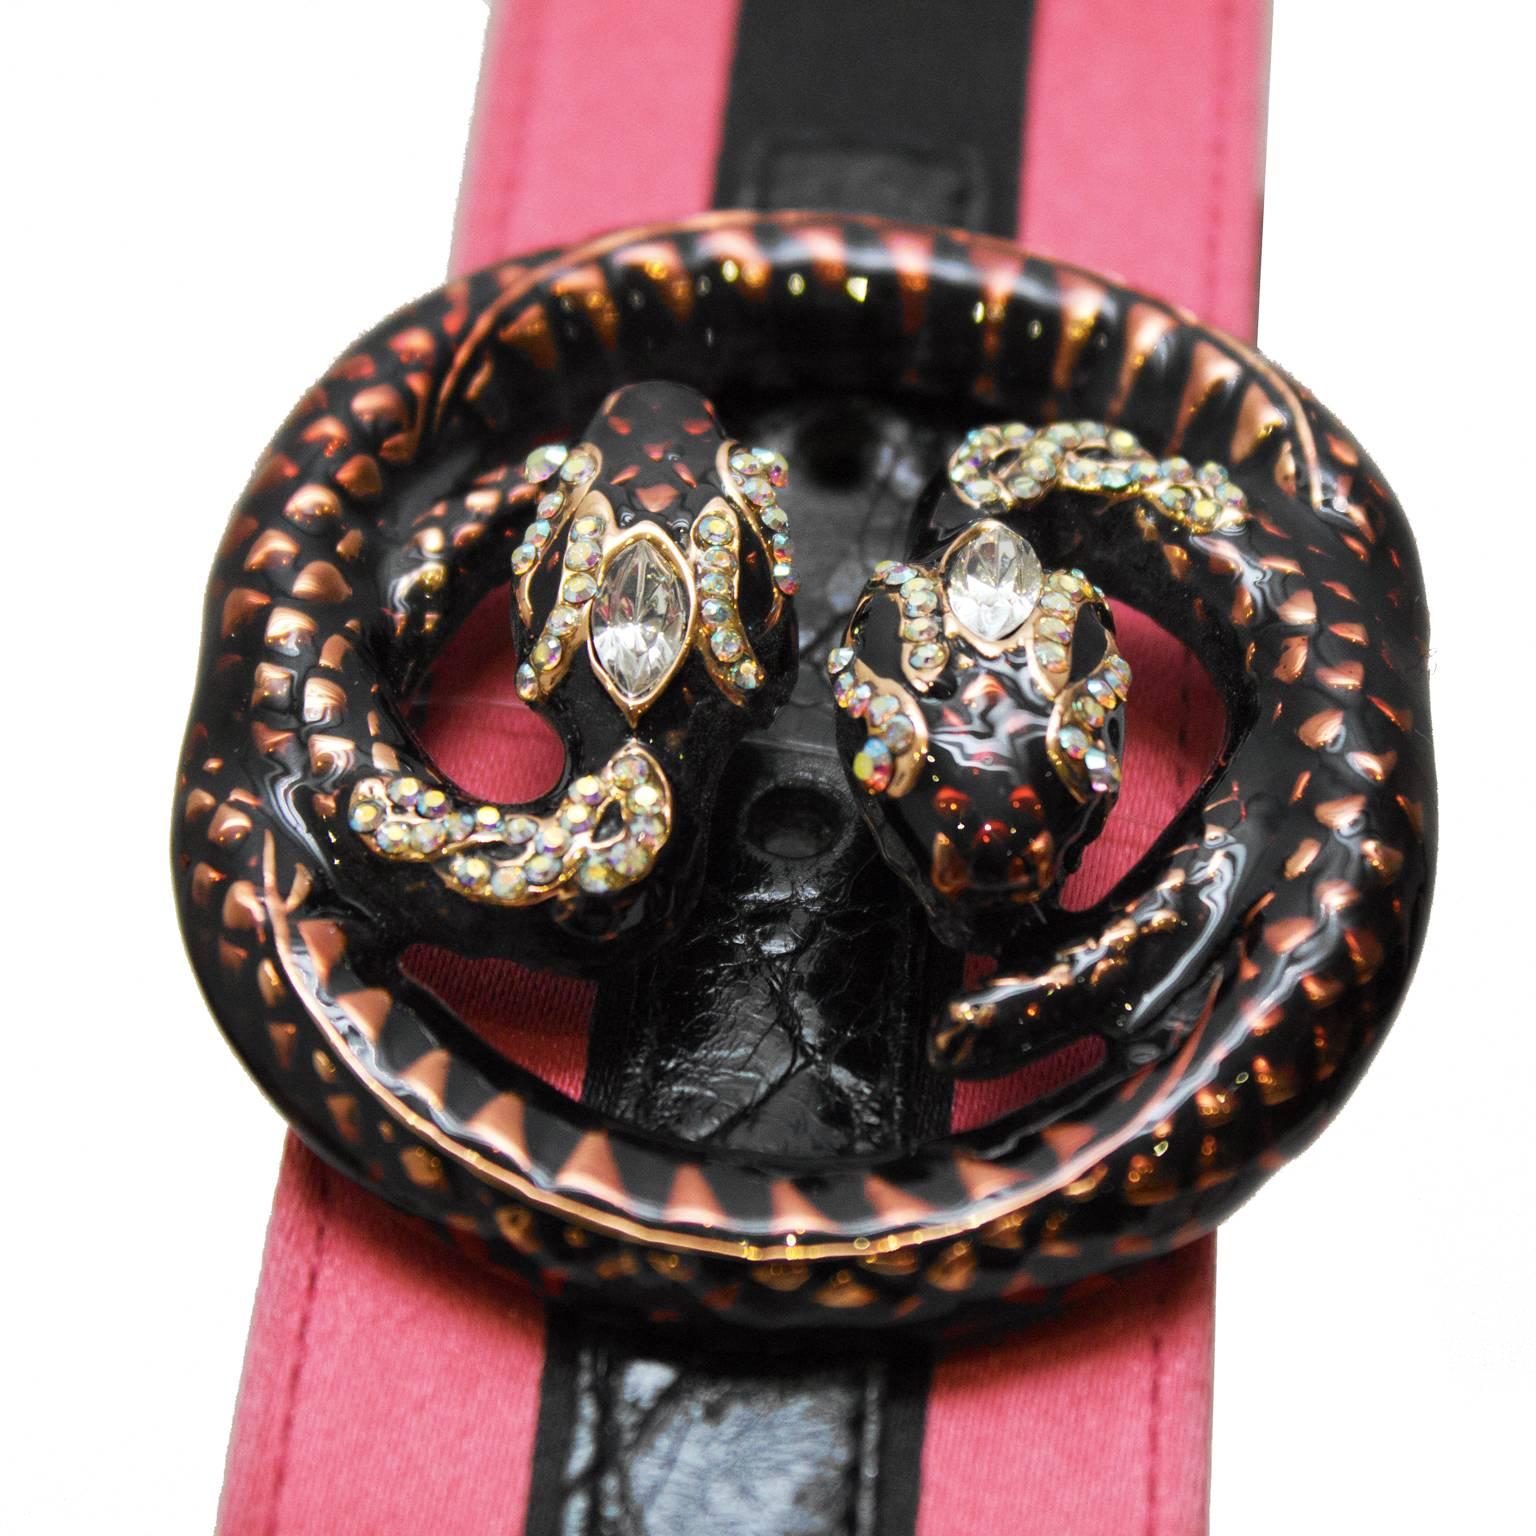 Gucci pink satin and black crocodile belt from the Tom Ford era. The belt features a unique enamel and rhinestone double snake buckle in the shape of the Gucci logo revived from the Gucci archives. The belt is adjustable. No signs of wear to the